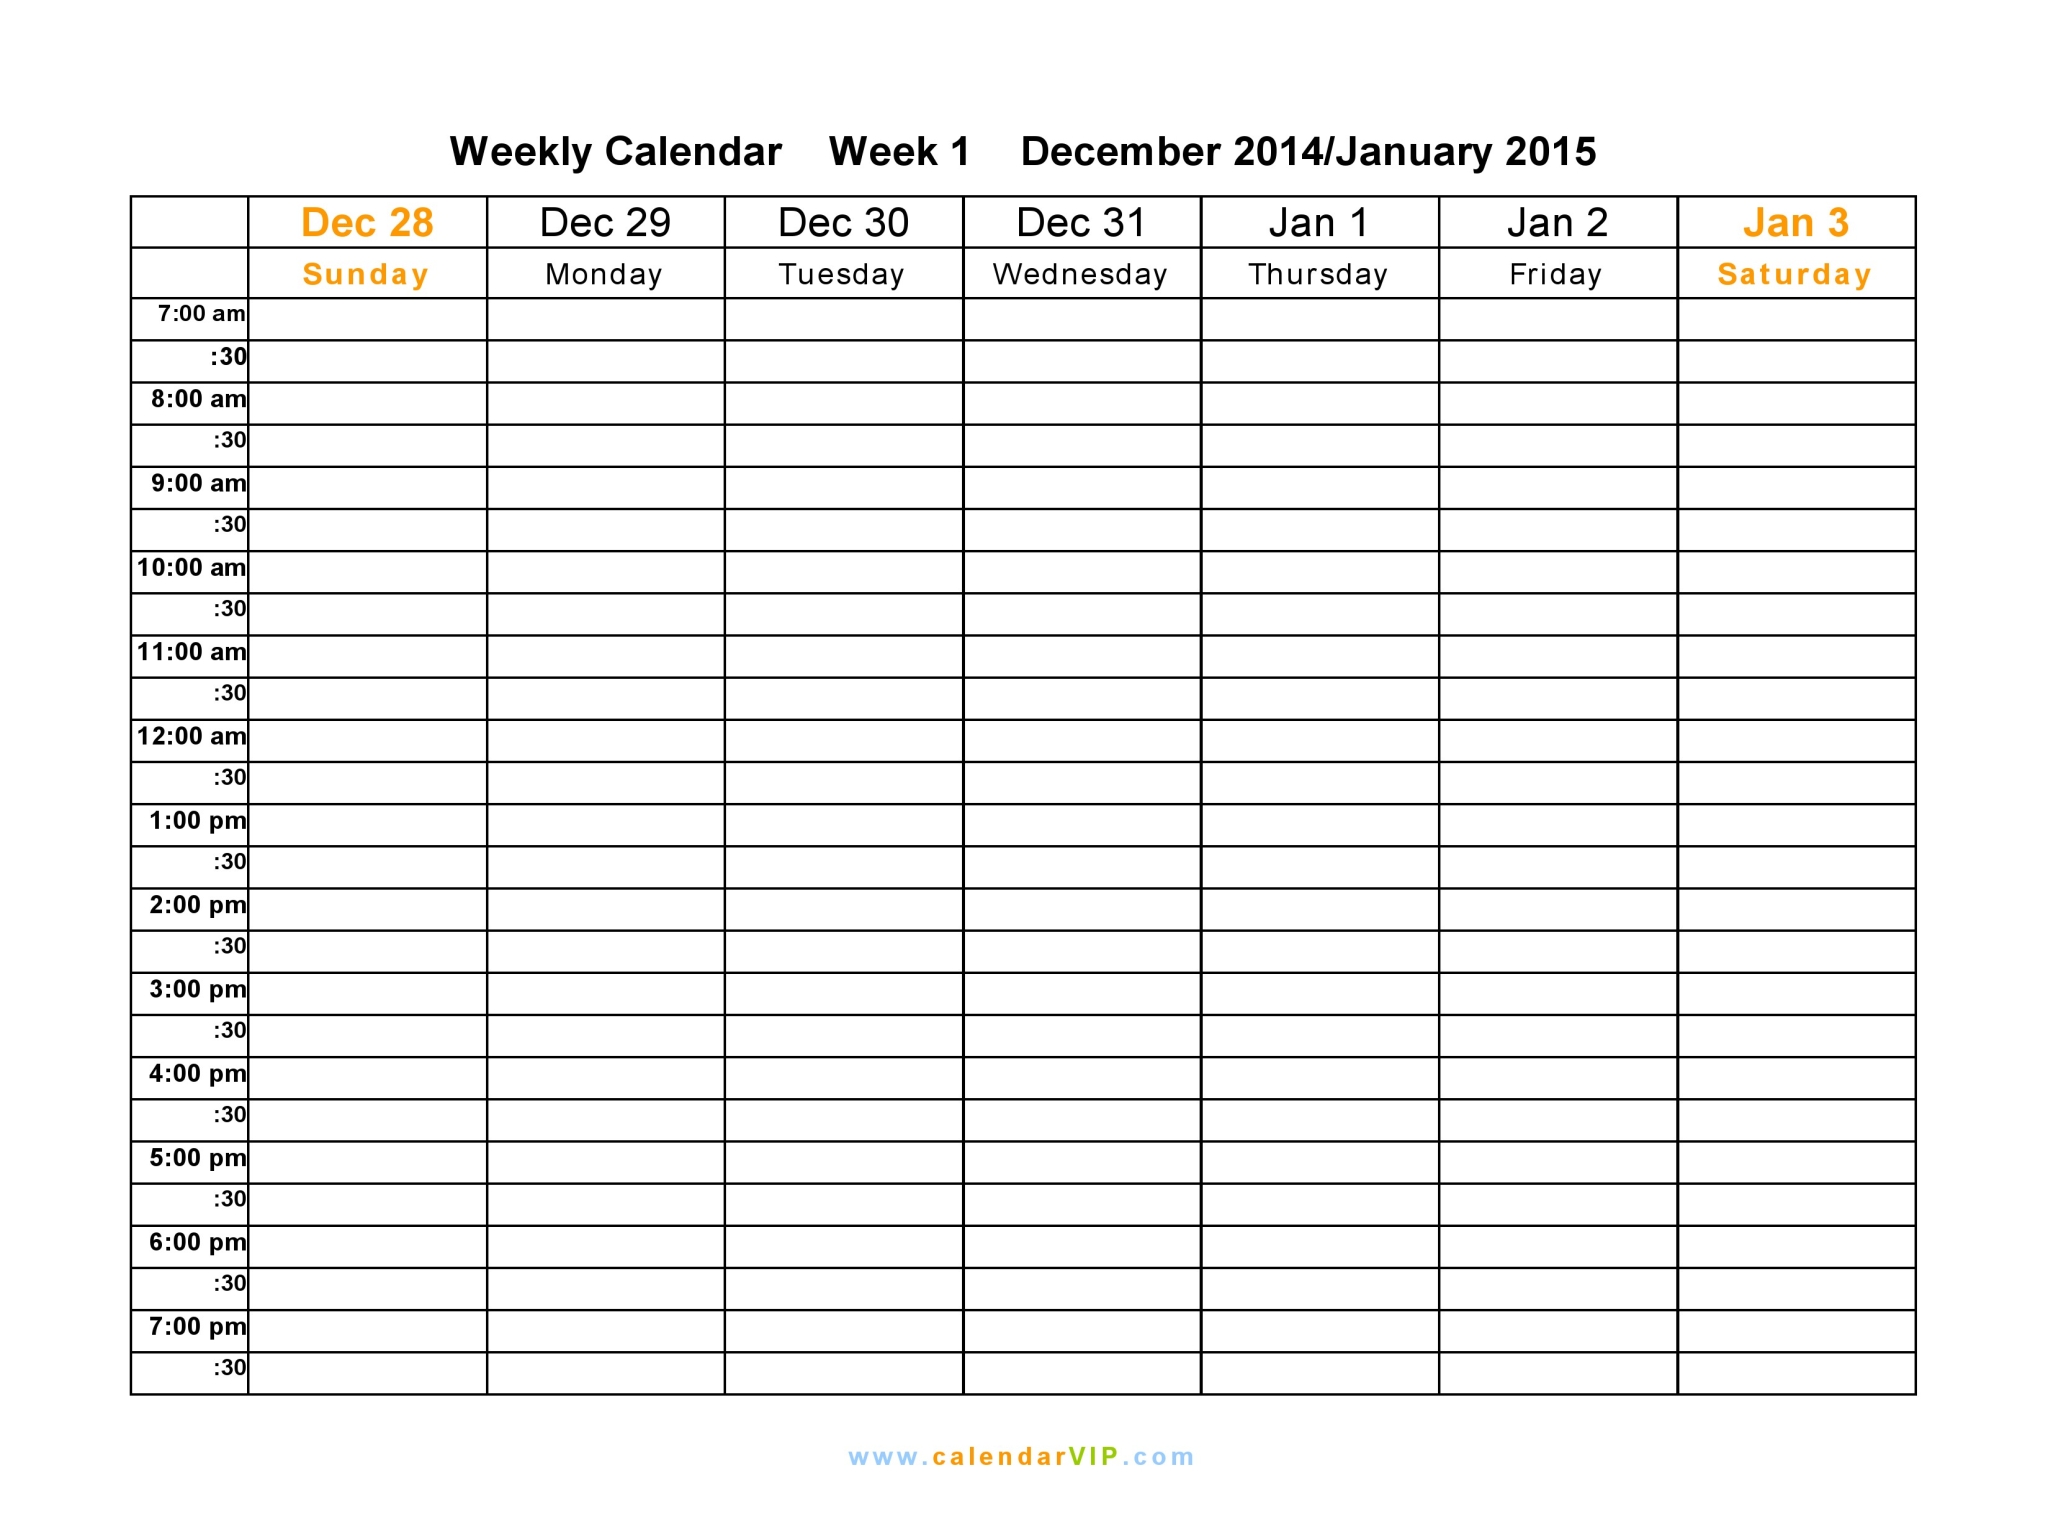 Weekly Calendar With Times 2015